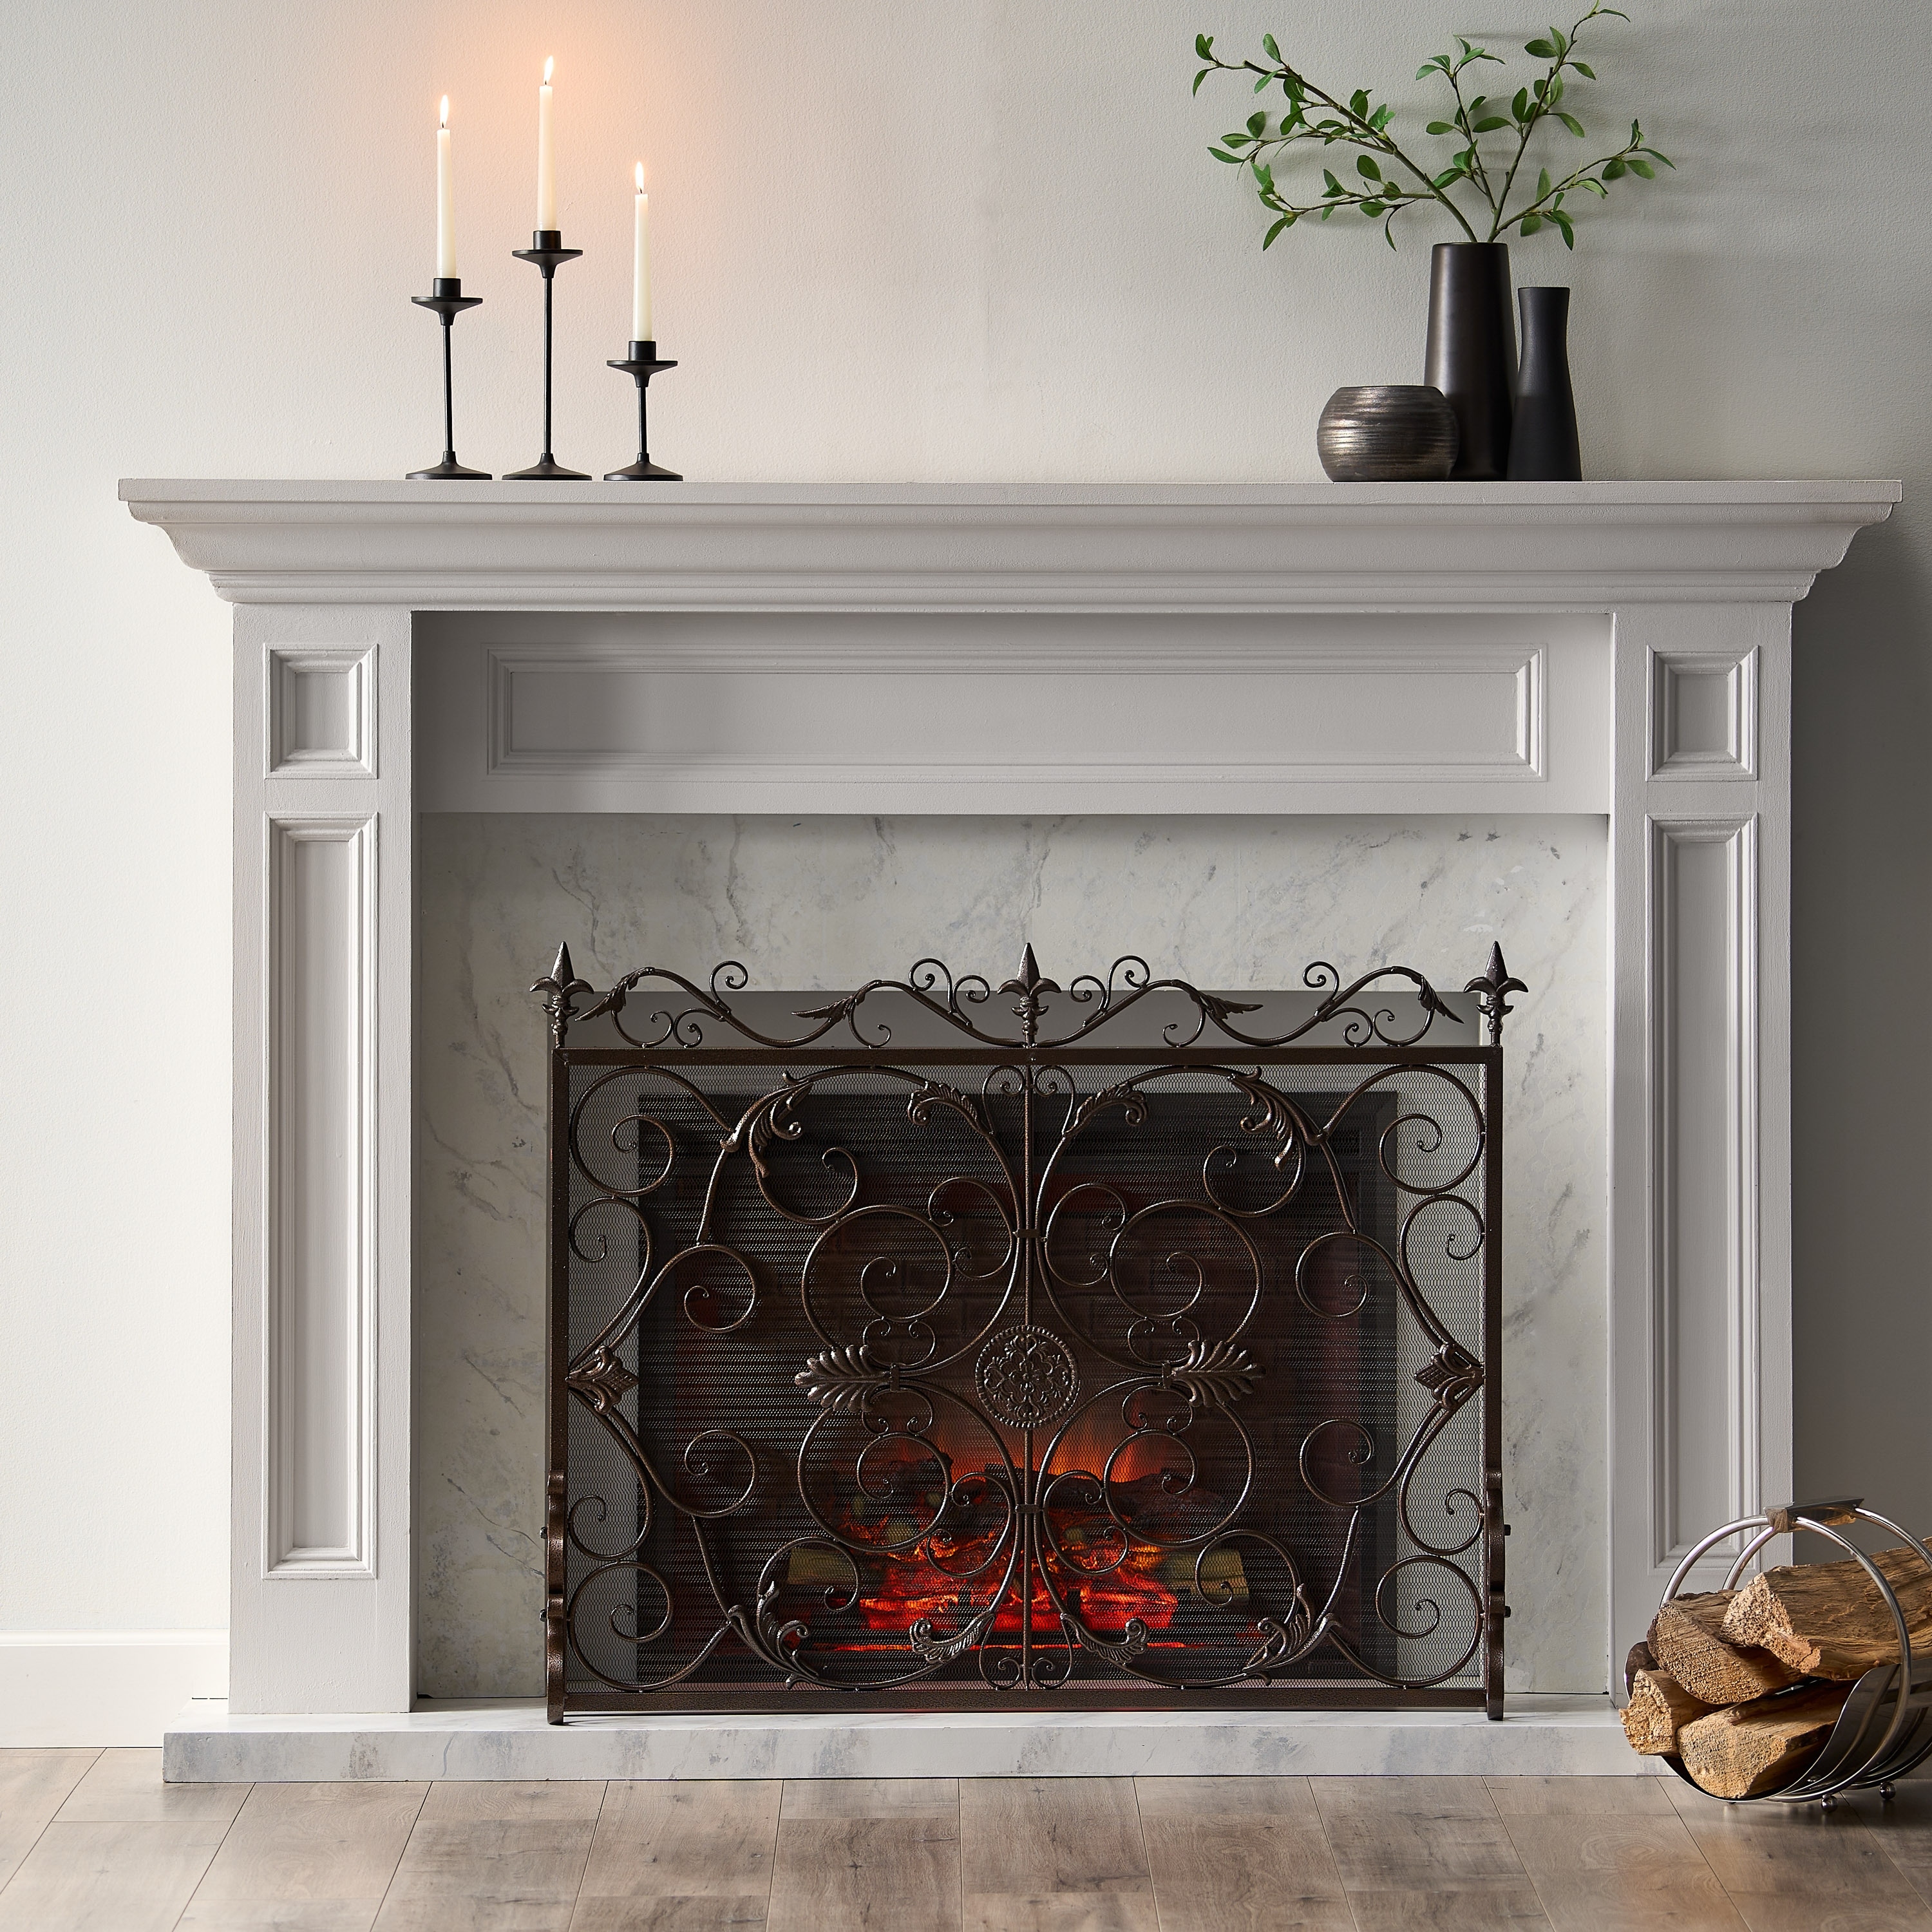 Cast Iron Antique Fireplace Manufacturers and Suppliers China - Brands -  Hi-Flame Metal